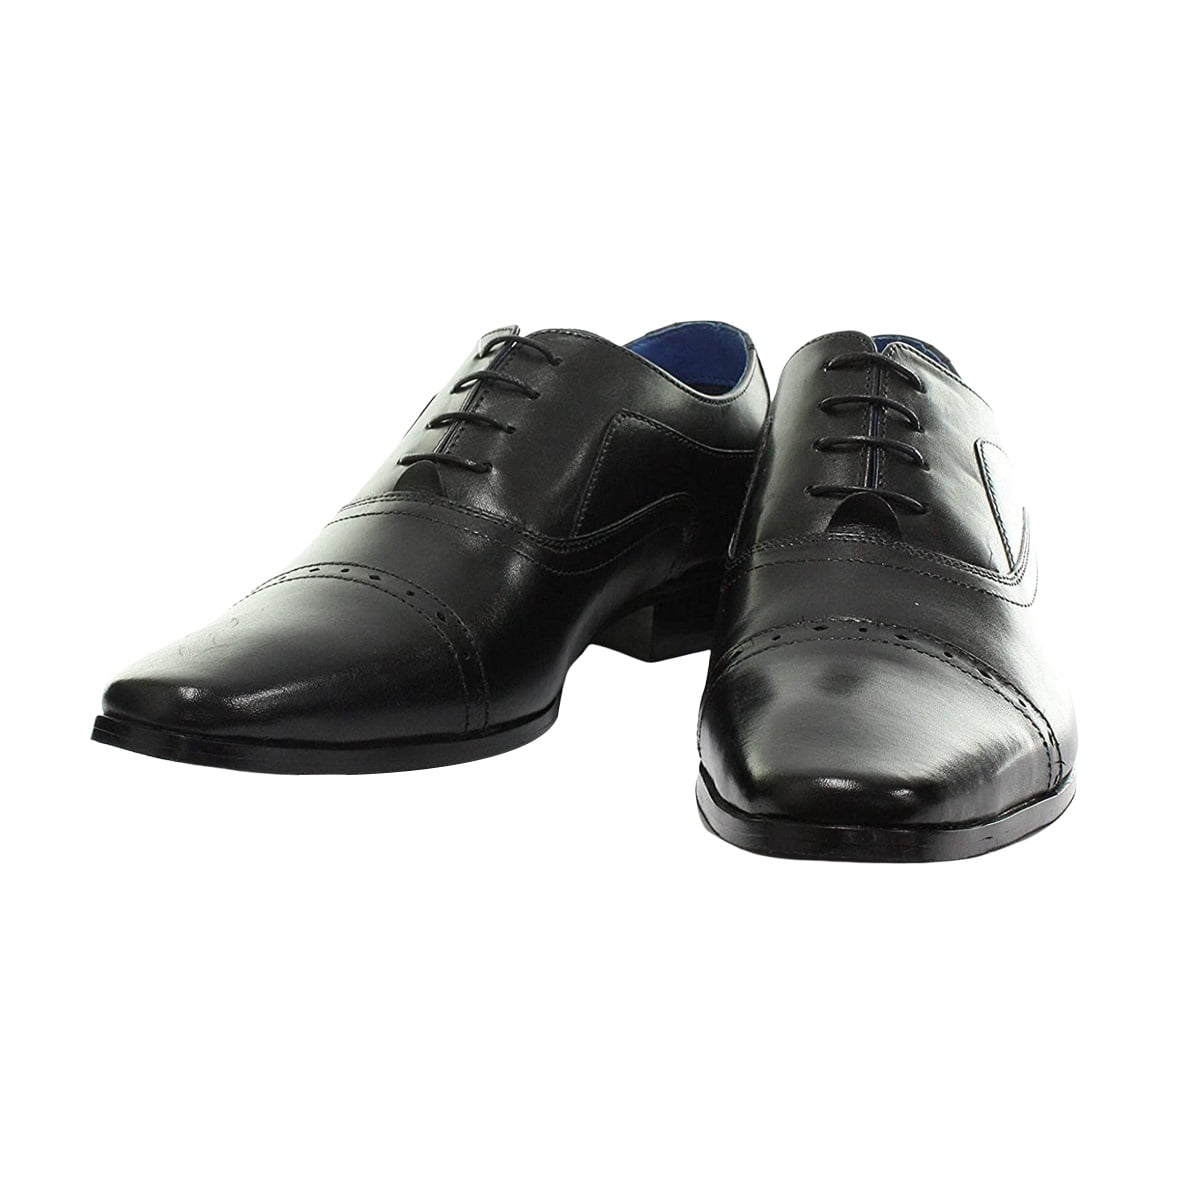 Roamers Mens Leather Padded Lace-Up Apron Gibson Formal Office Work Shoes Black 